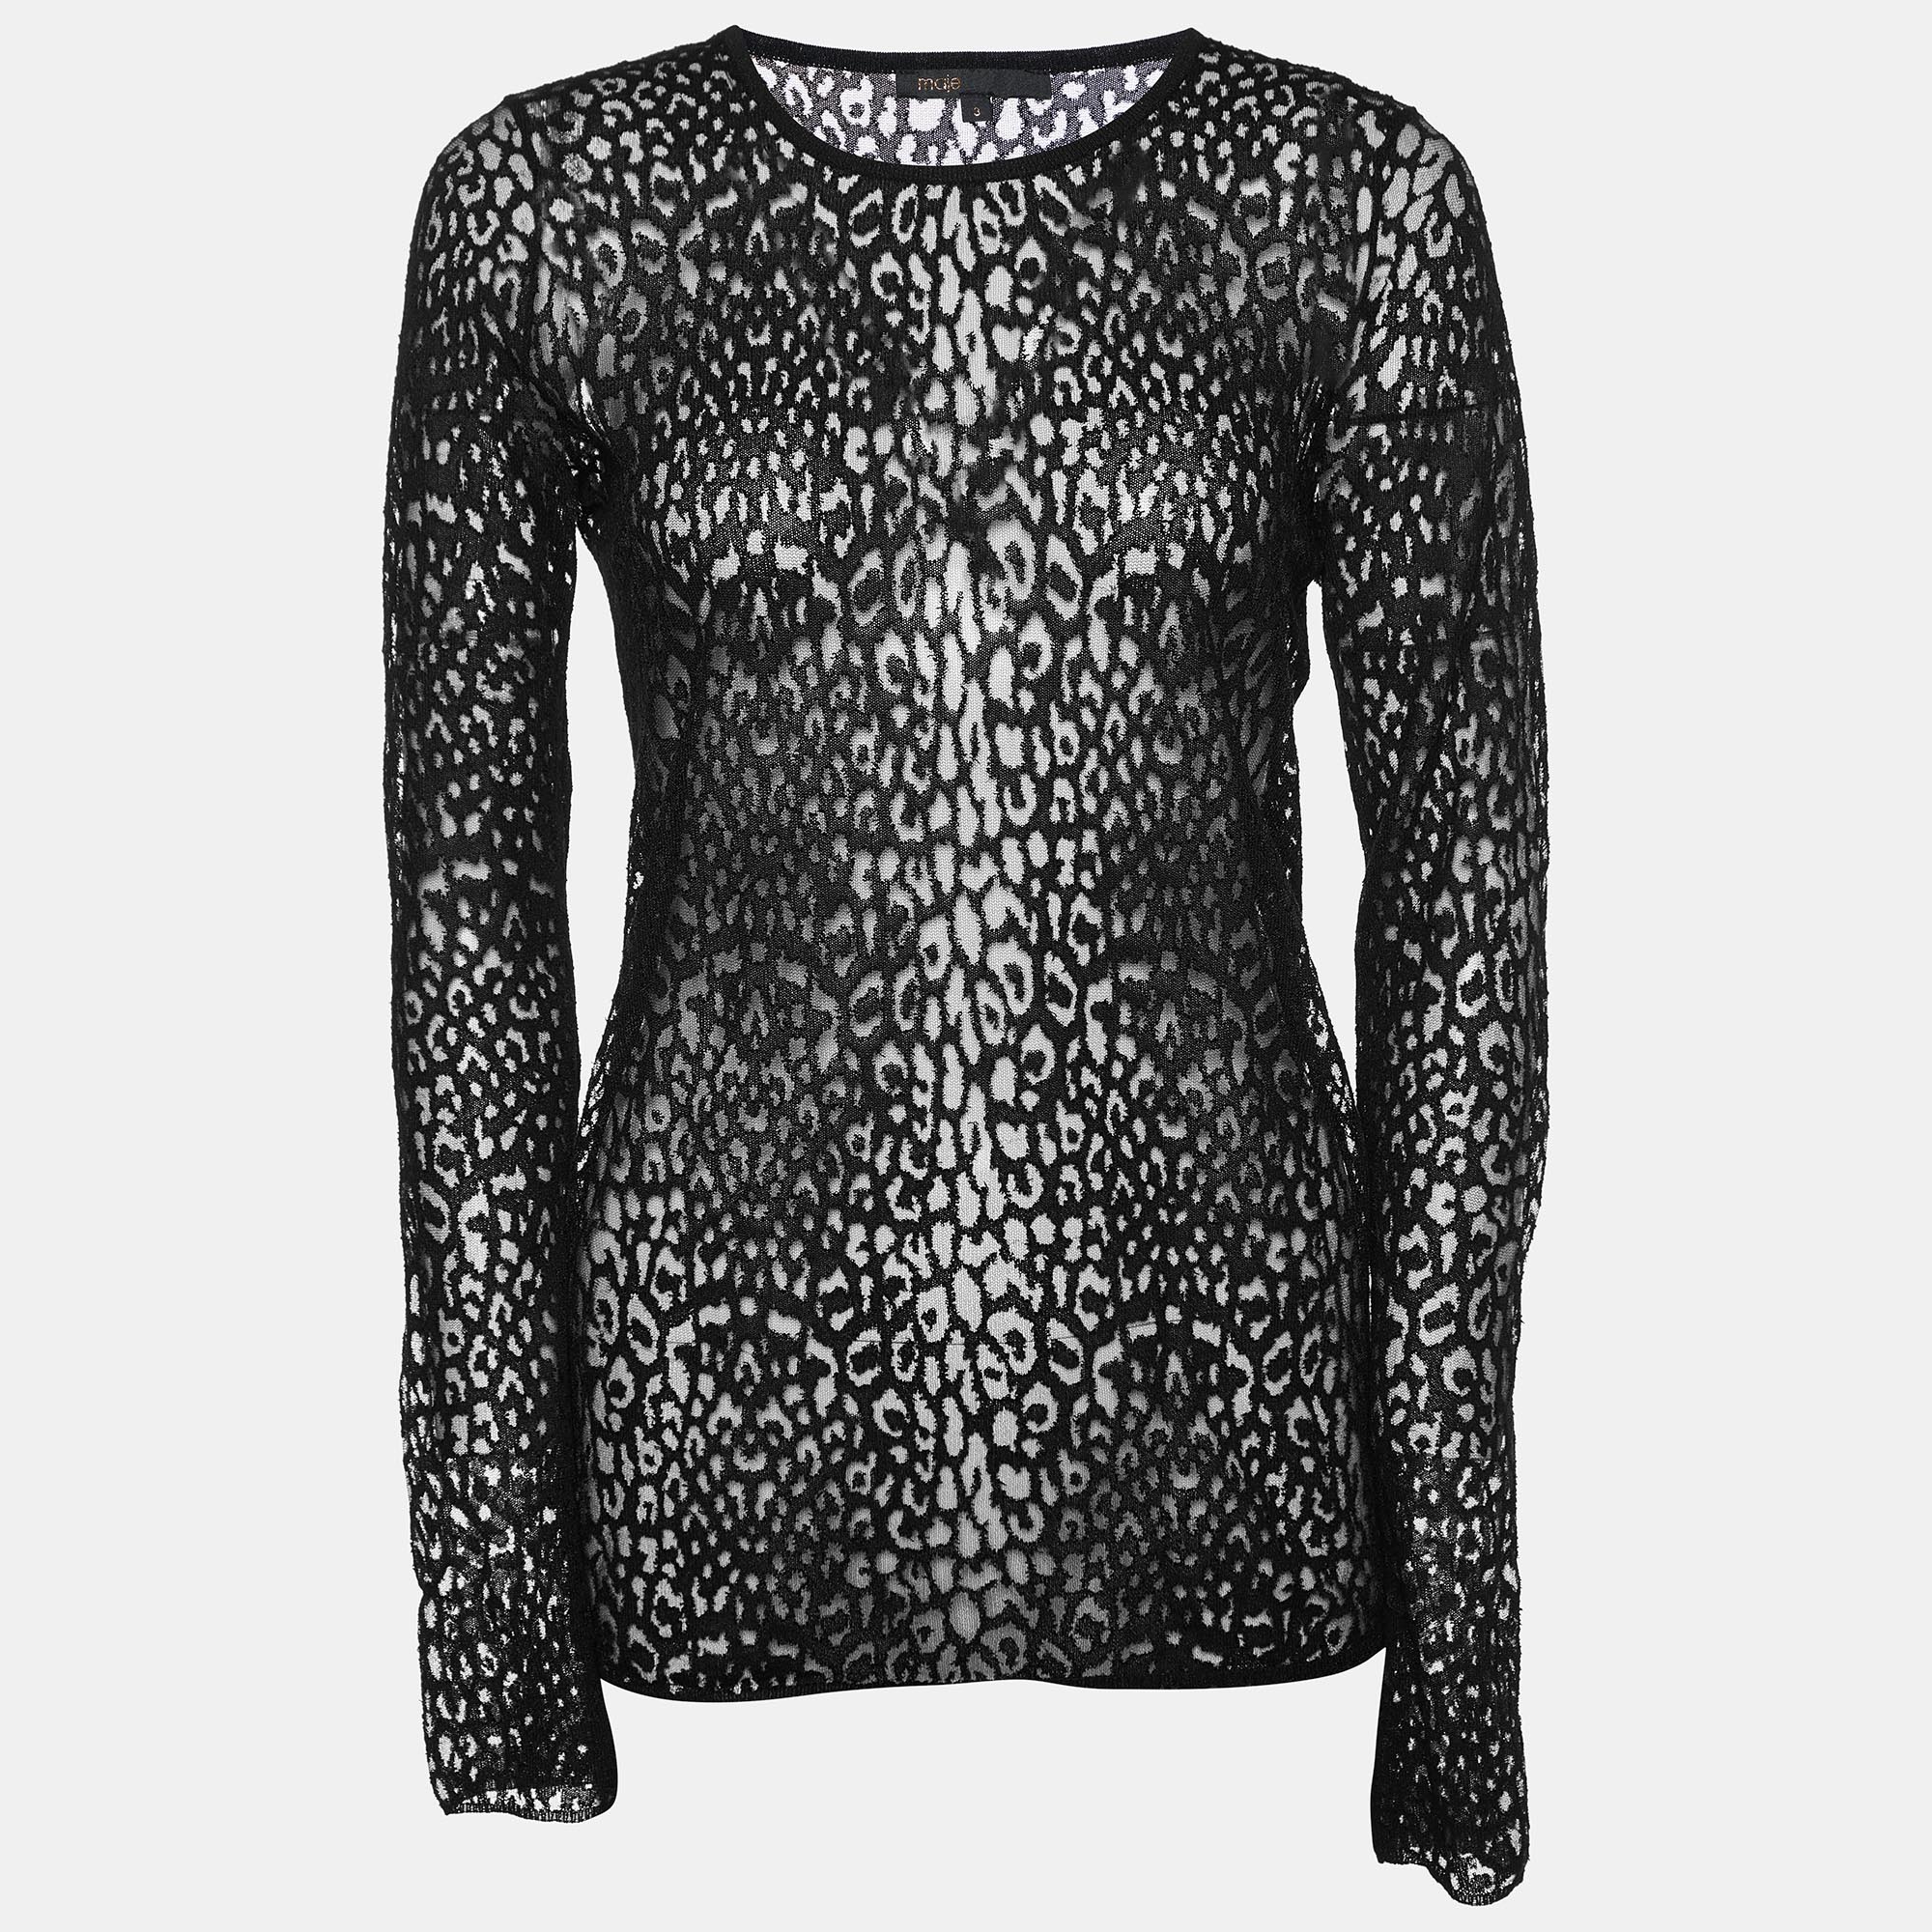 

Maje Black Patterned Lace Full Sleeves Top S